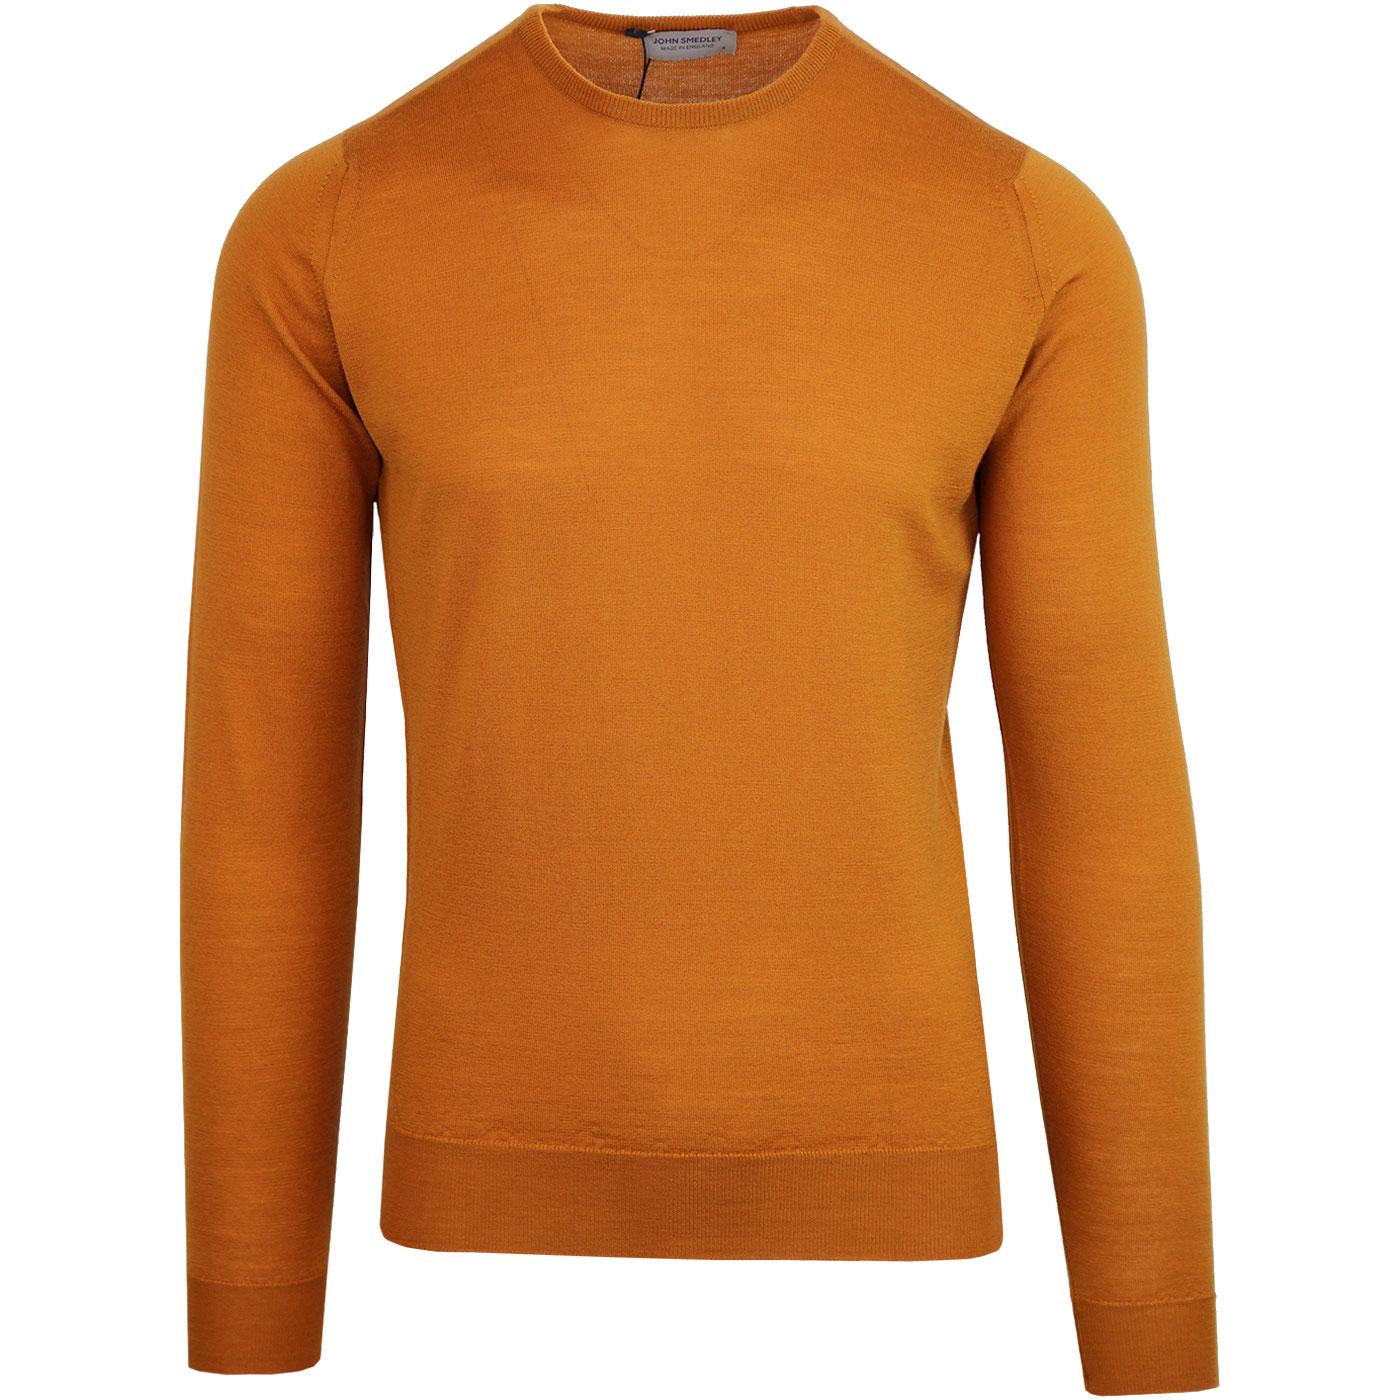 Lundy JOHN SMEDLEY Made in England Jumper BRONZE